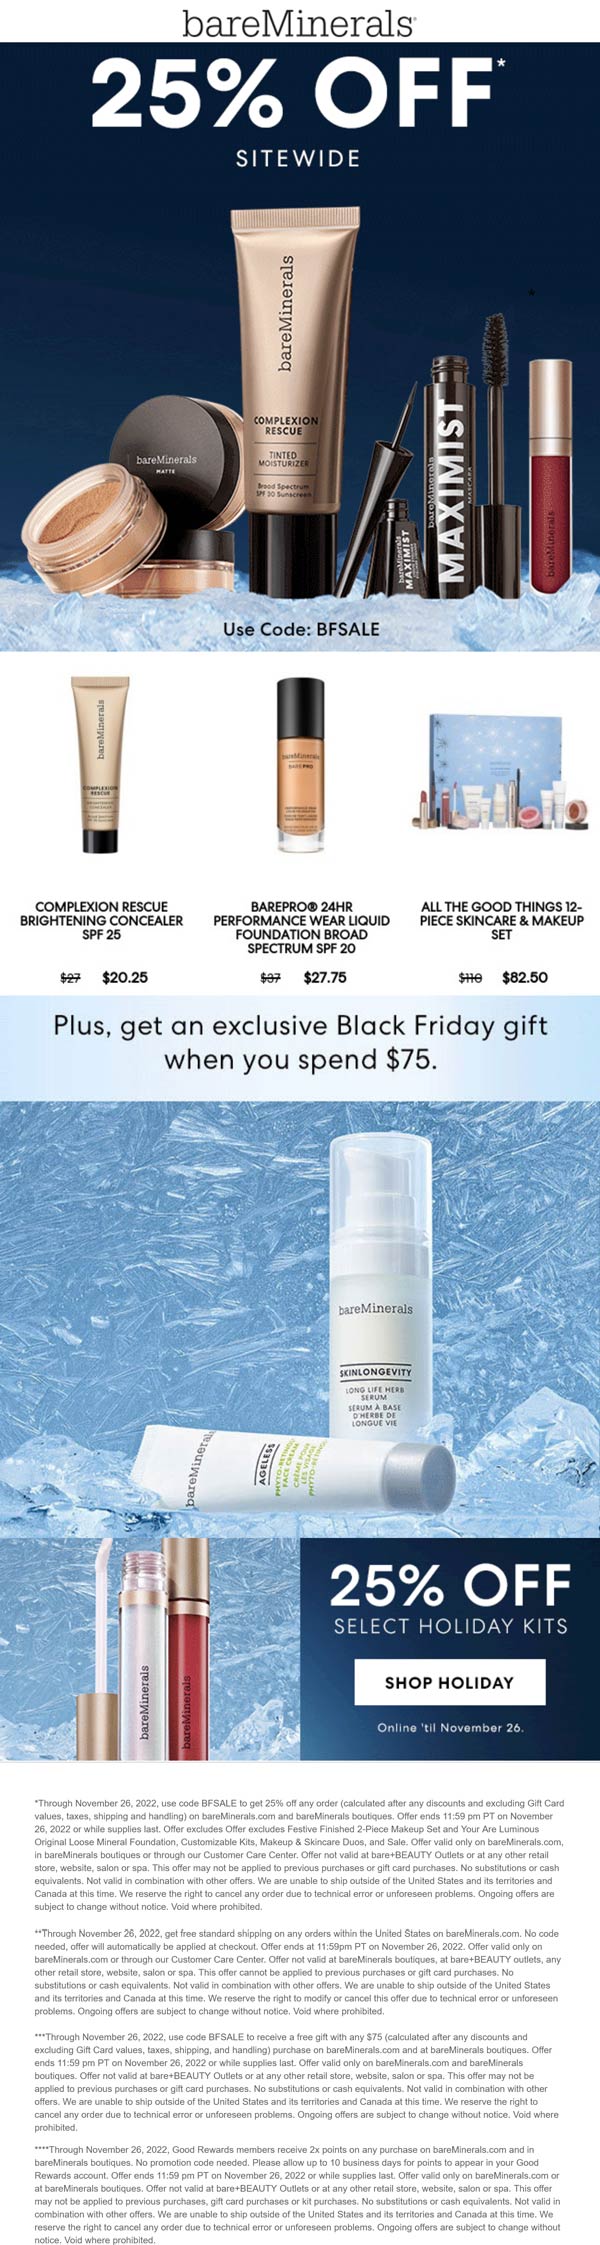 bareMinerals stores Coupon  25% off everything at bareMinerals, or online via promo code BFSALE #bareminerals 